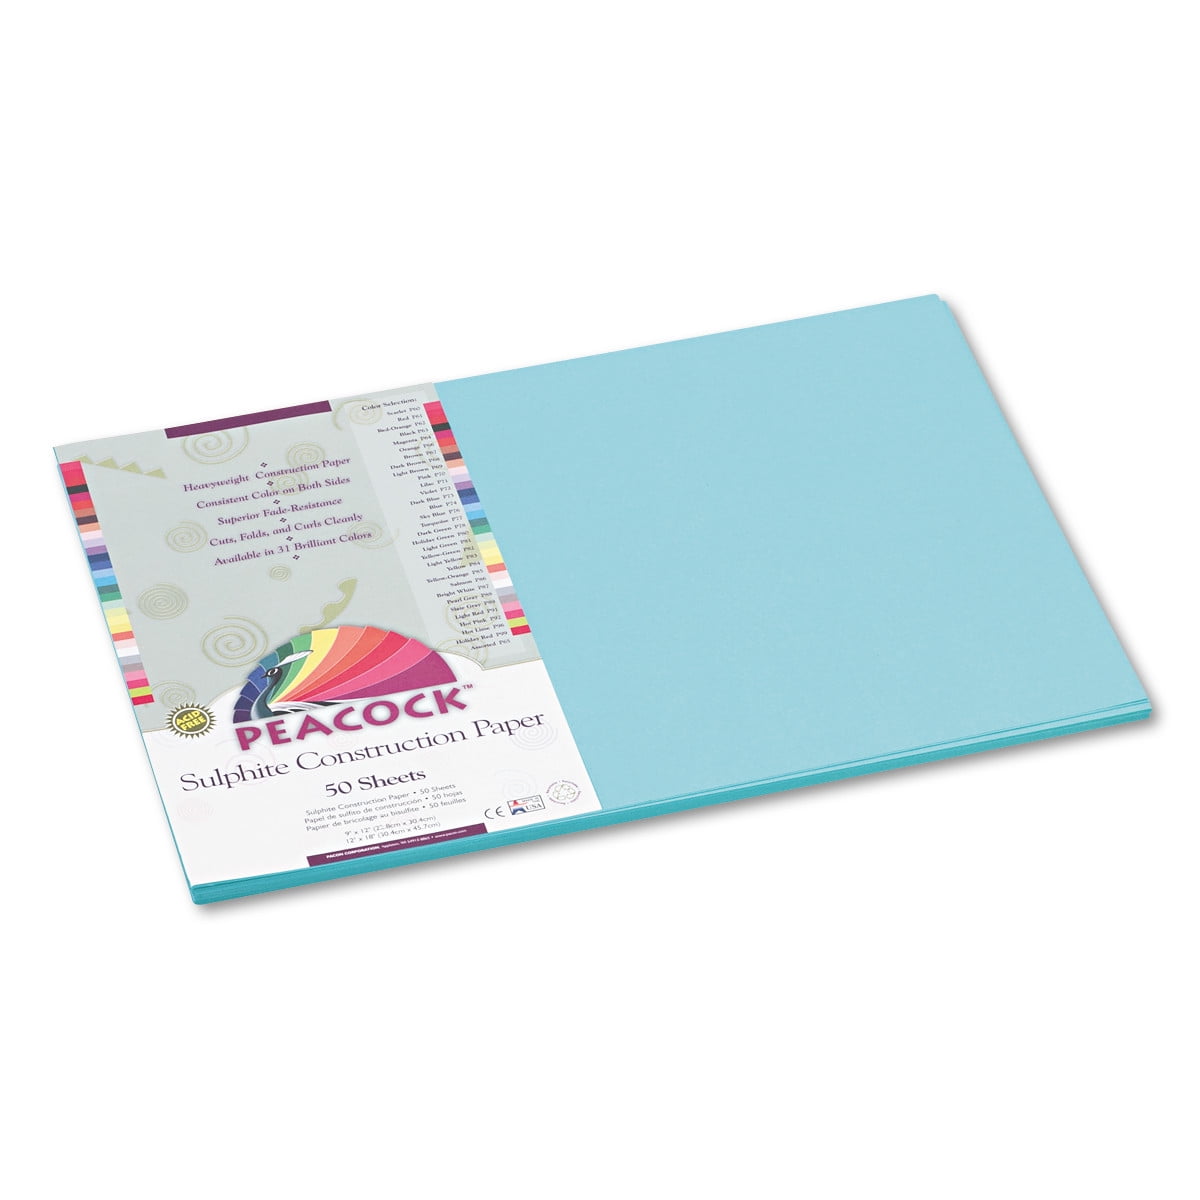 Pacon P6512 Peacock Sulphite Construction Paper, 76 lbs, 12 x 18, Assorted, 50 Sheets/Pack